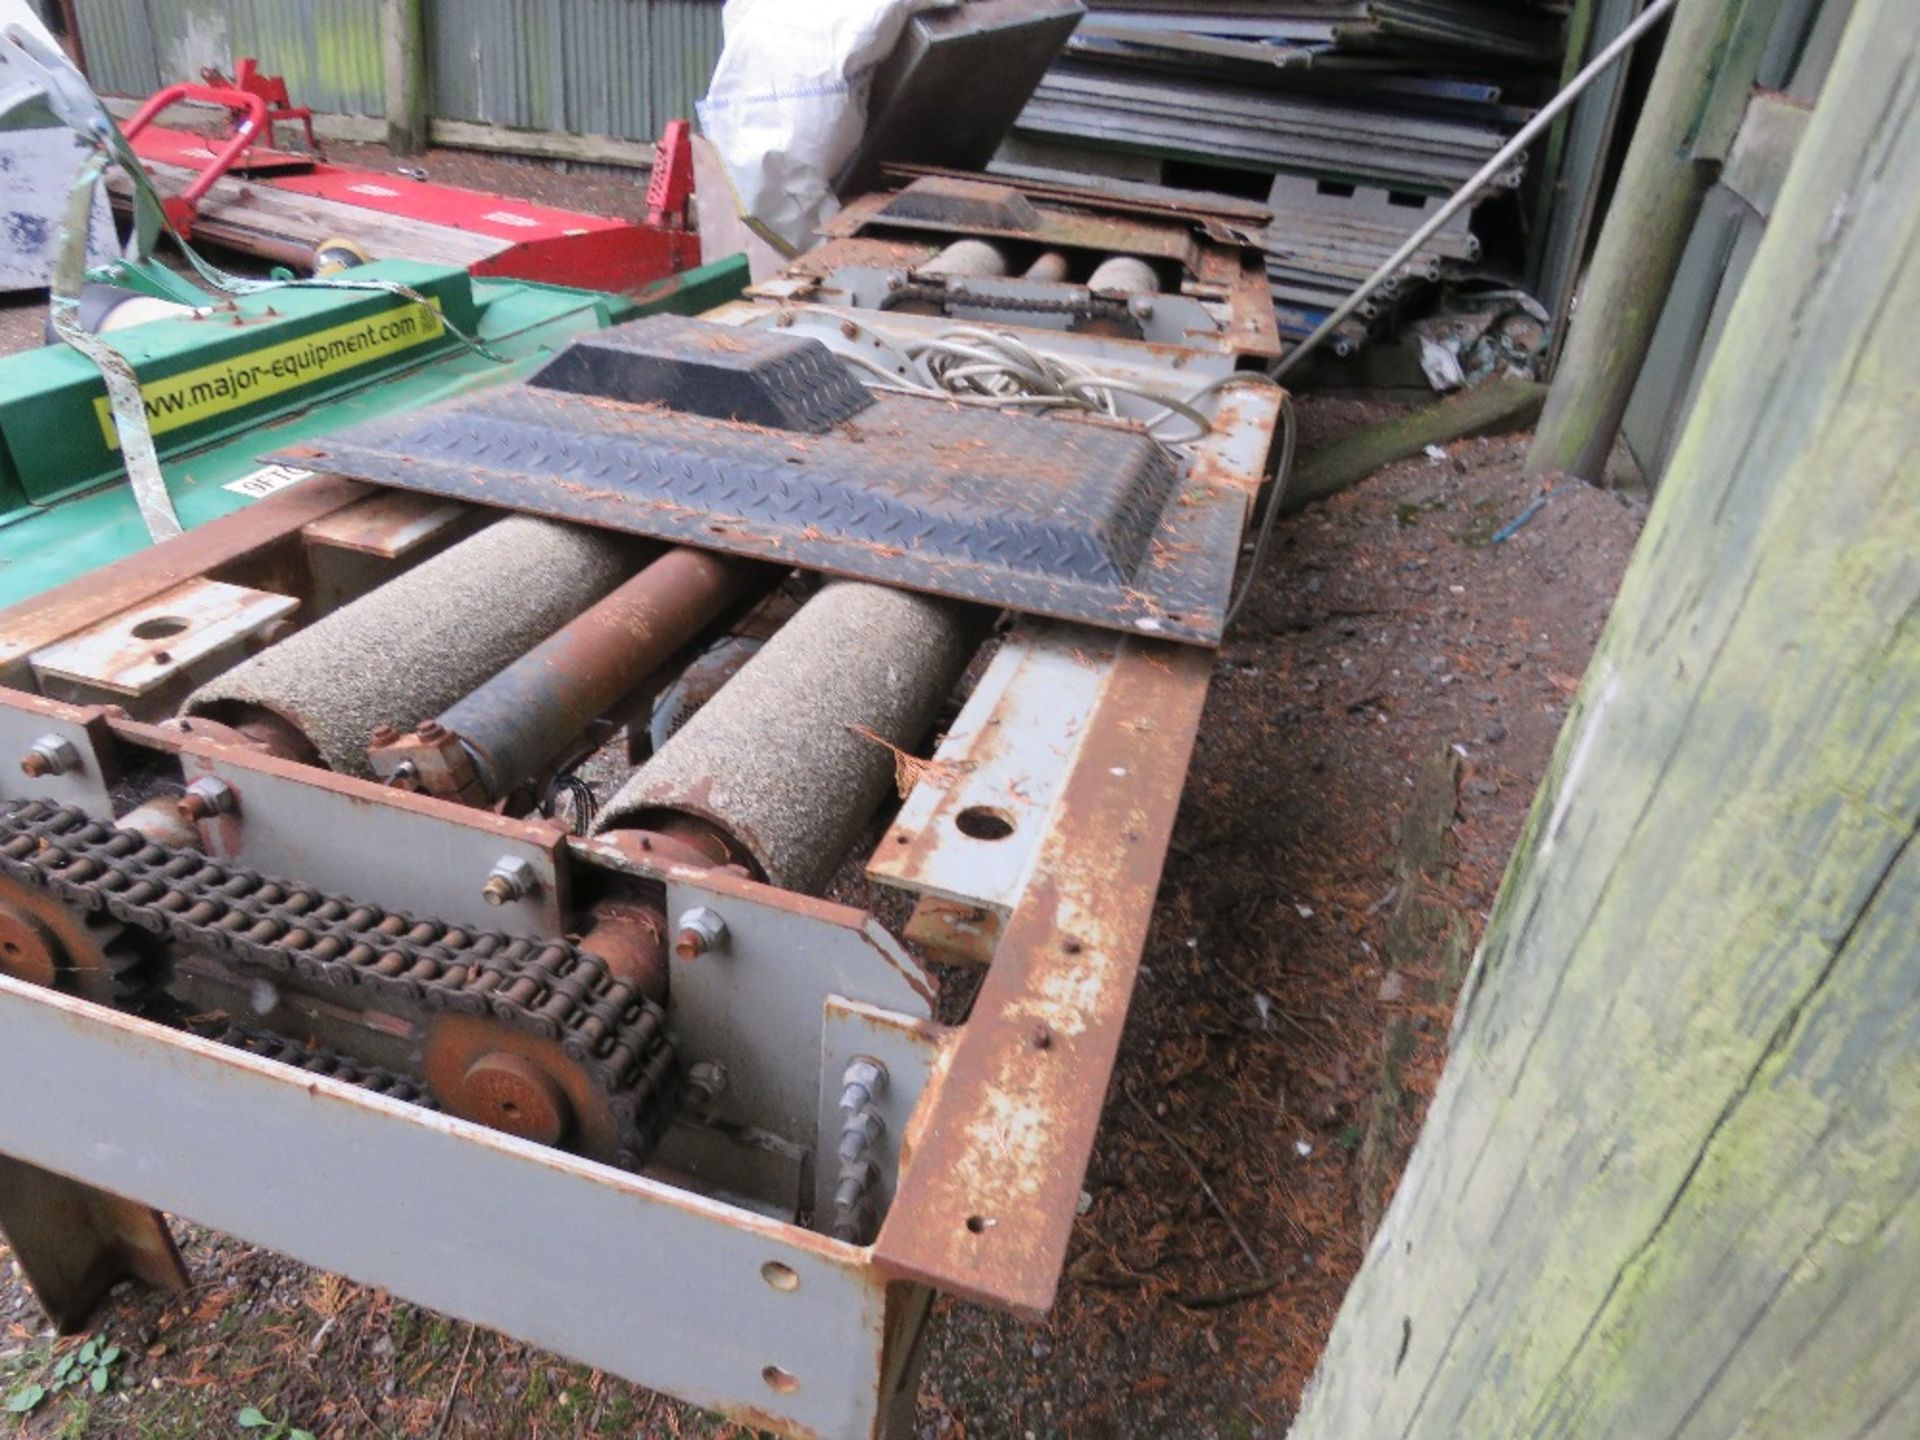 COMMERCIAL VEHICLE BRAKE TEST ROLLERS WITH ASSOCIATED EQUIPMENT. BELIEVED TO BE EWJ MAKE. - Image 2 of 7